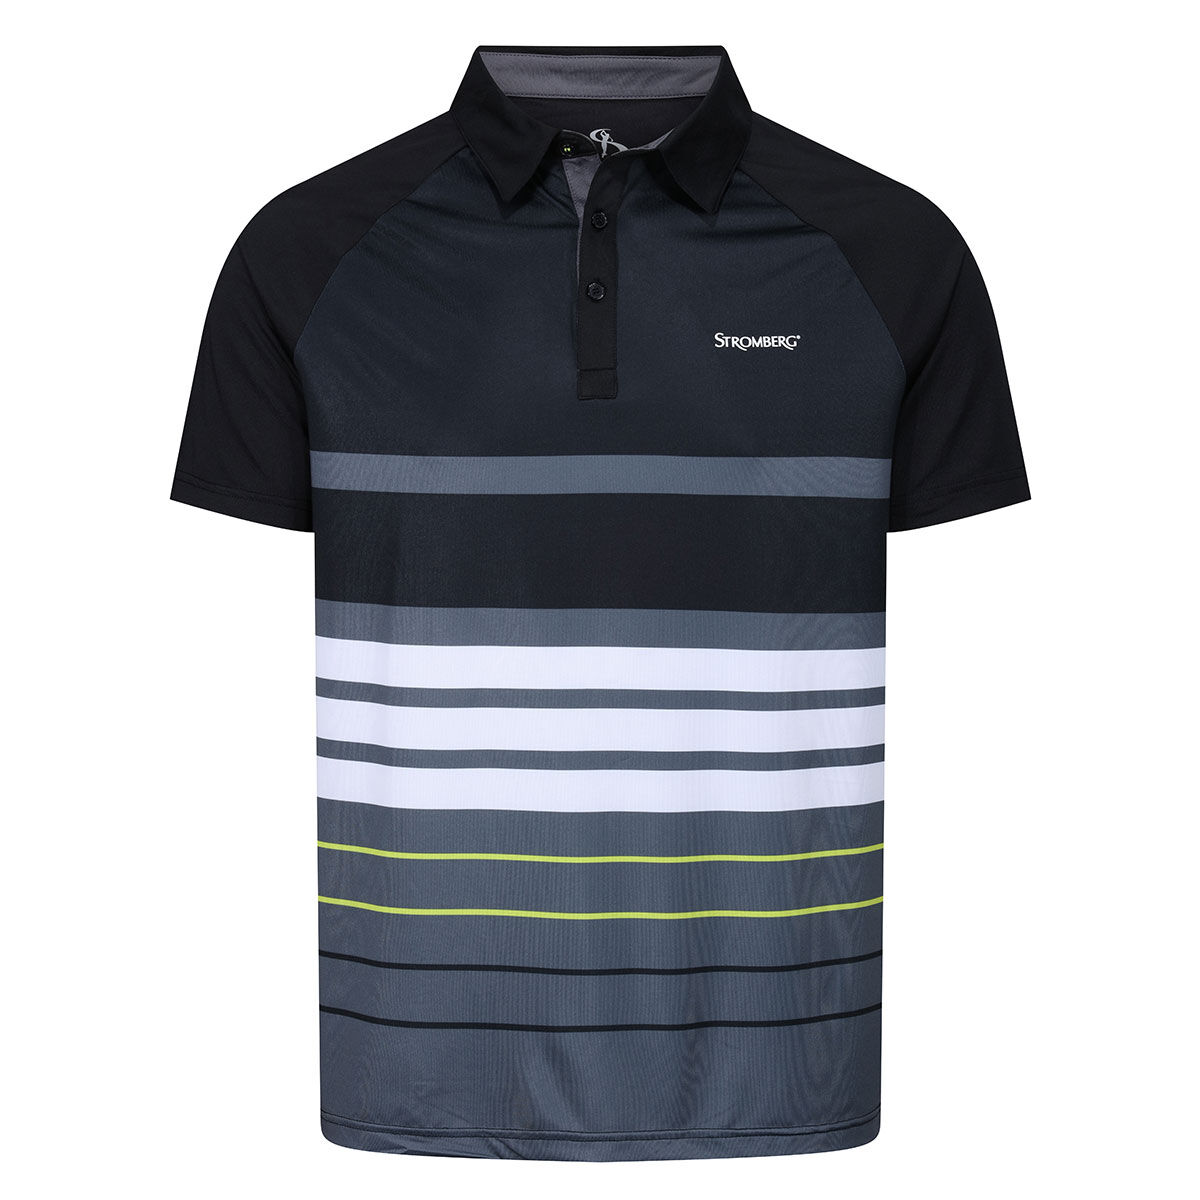 Stromberg Blue, White and Black Stripe Golf Polo Shirt, Size: Small | American Golf